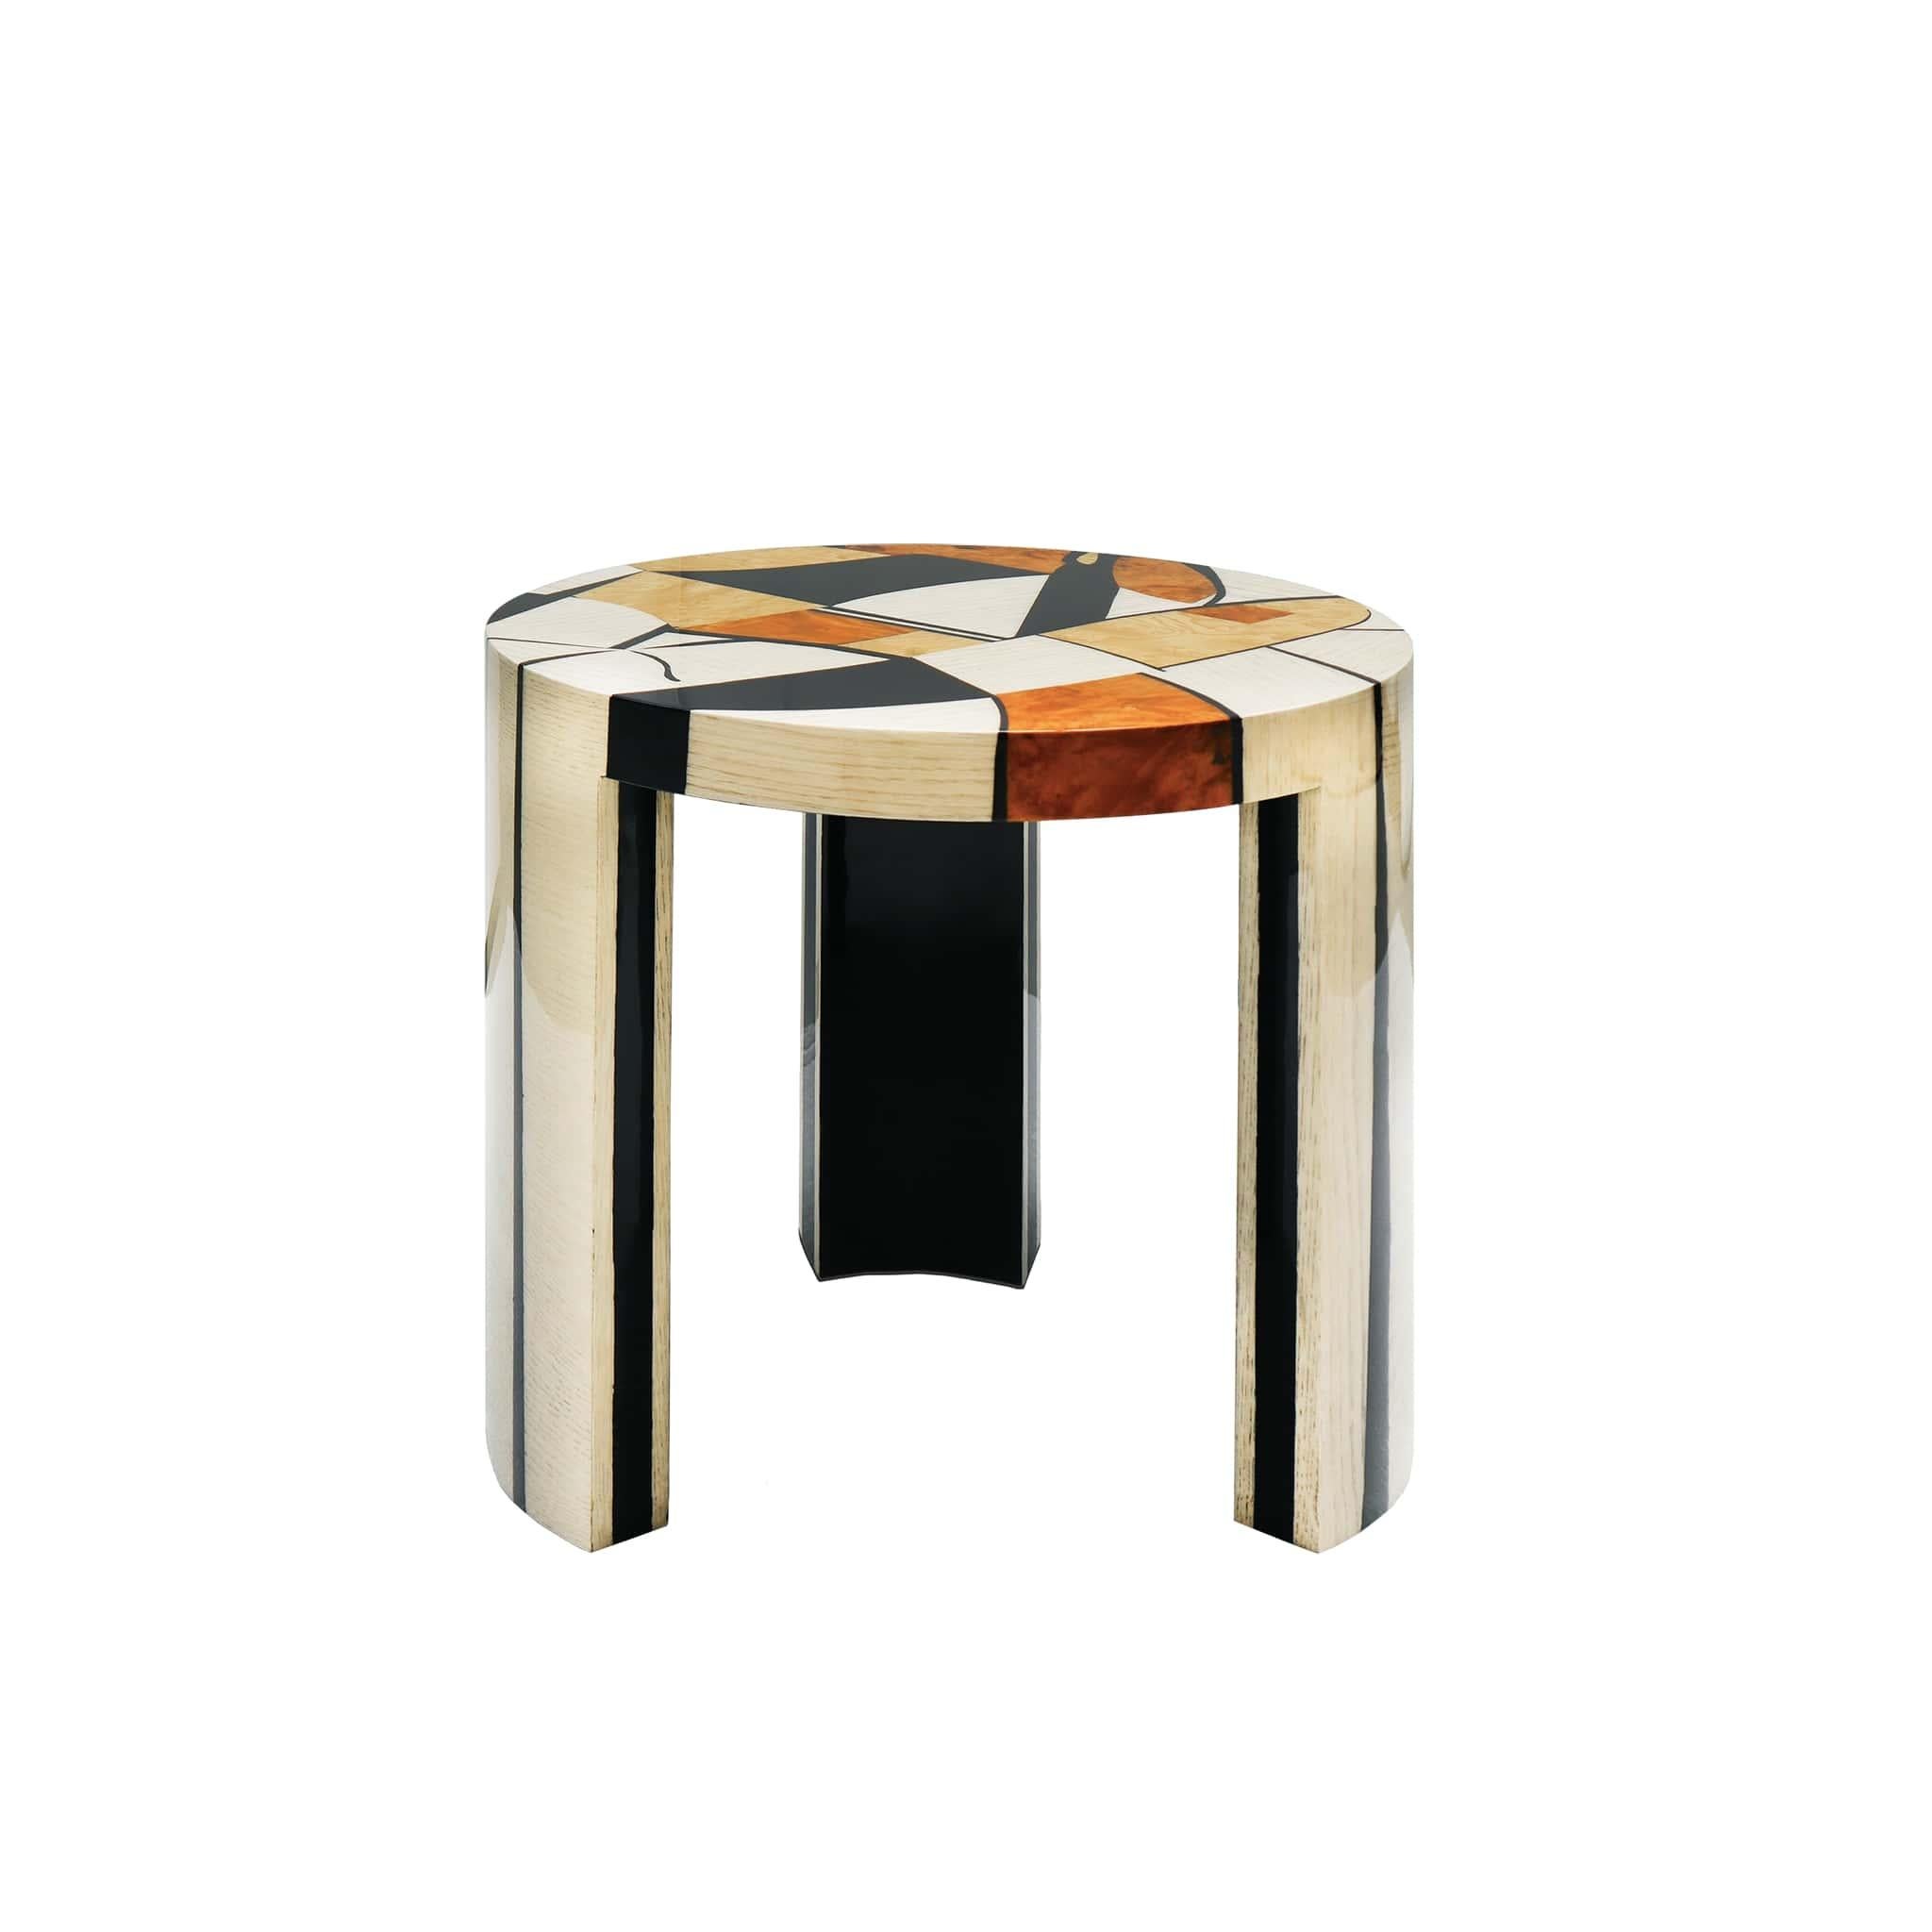 Austria Side Table is perfect for an artsy and luxury interior design project. A modern side table made in marquetry and it can be customized to meet your style and favorite wood colors.

Materials: Body in wood with marquetry. 

Dimensions: Width: